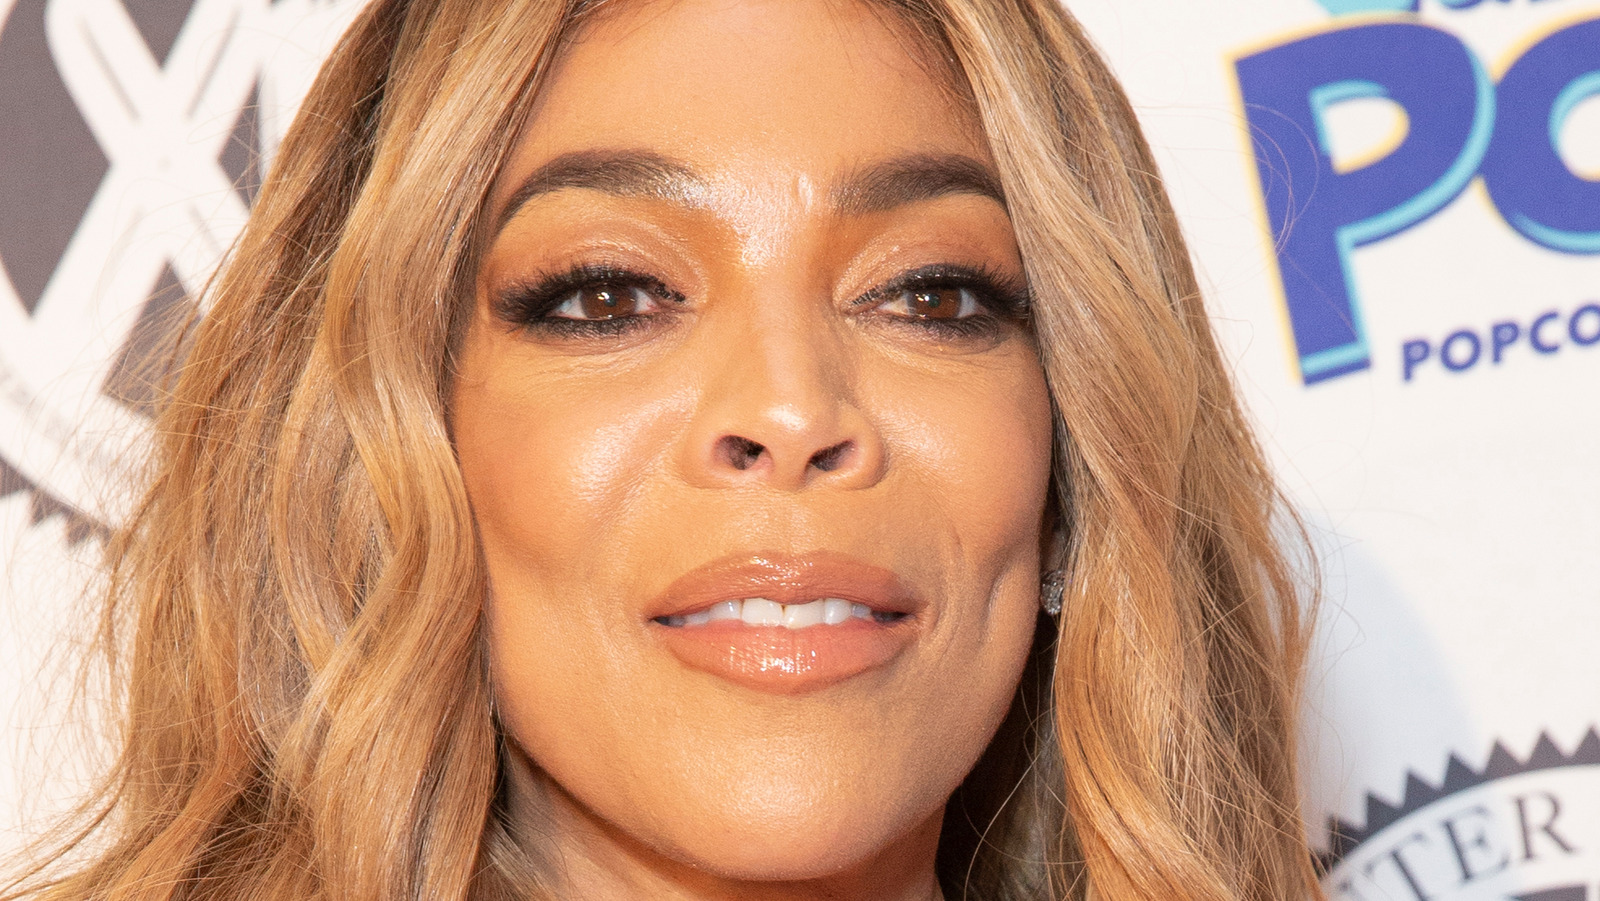 The Latest On What's Really Going On With Wendy Williams' Health Issues